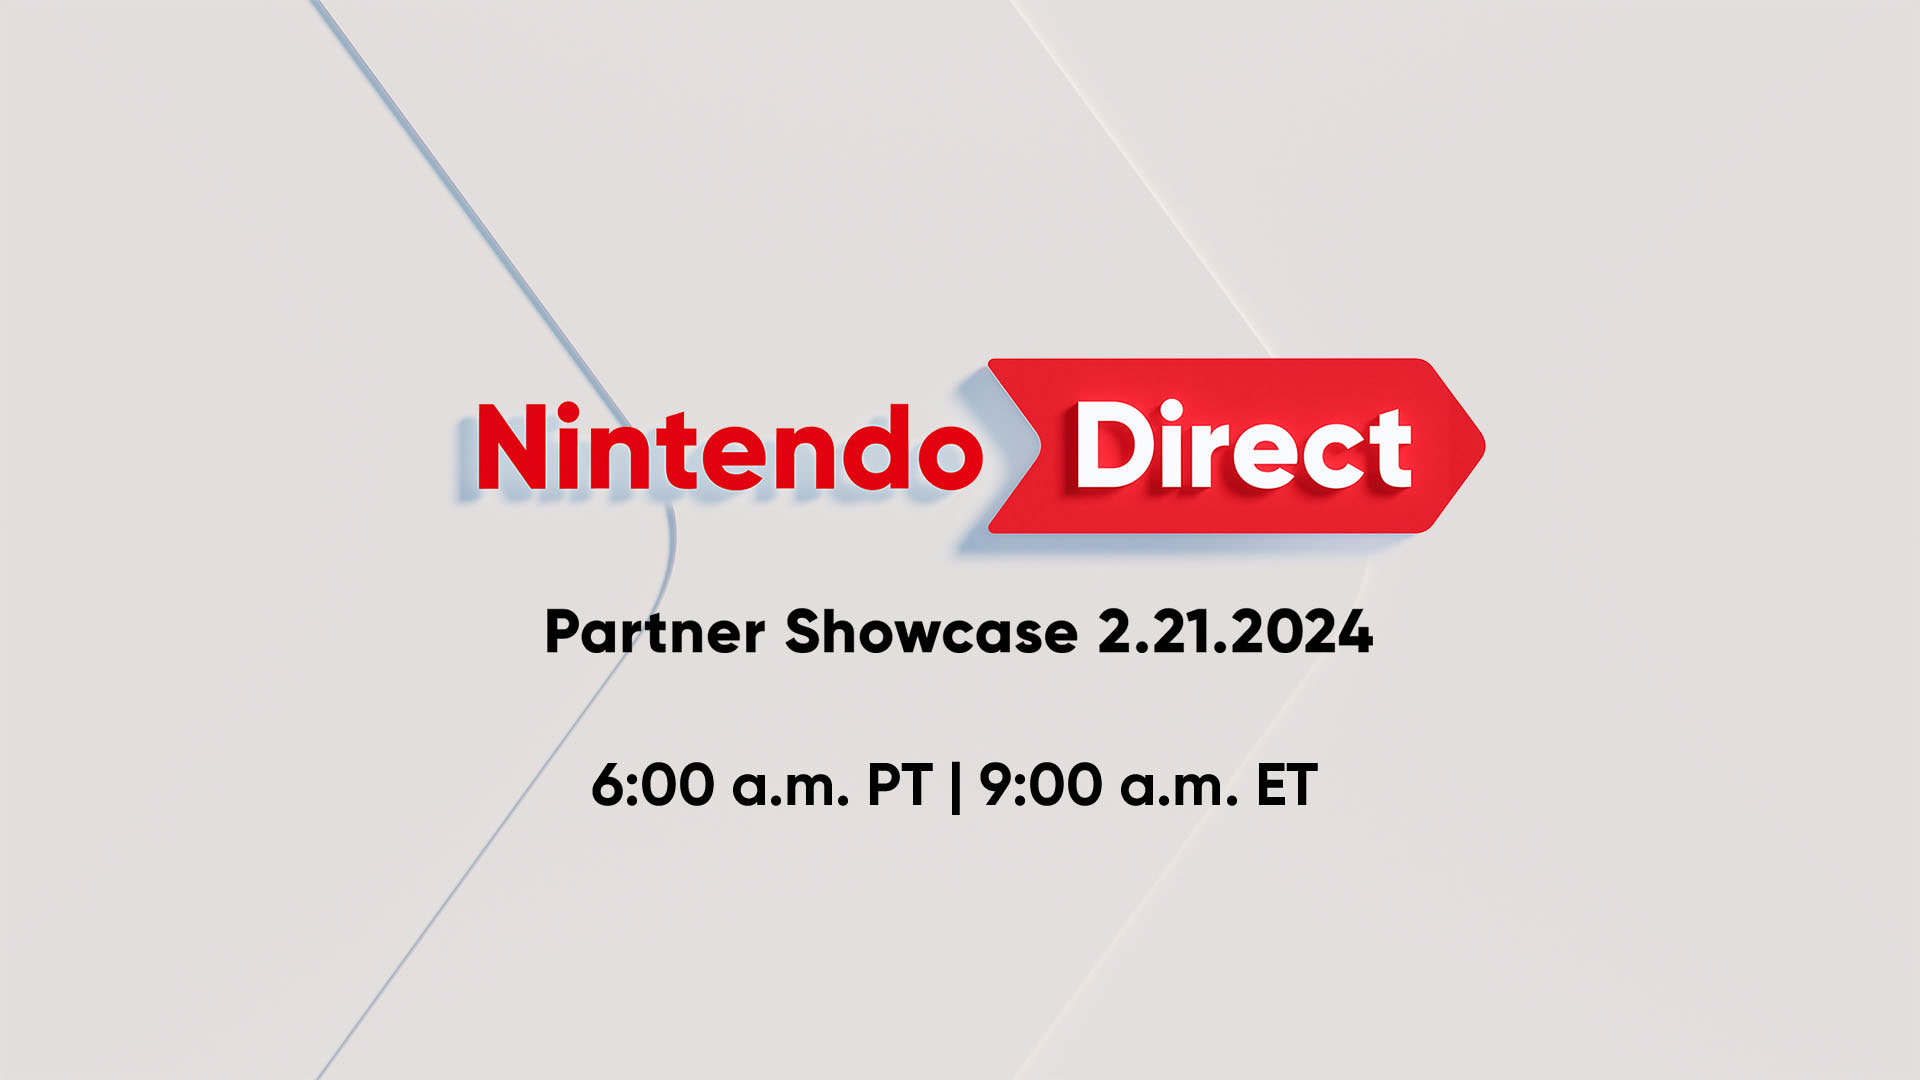 A Nintendo Direct Partner Showcase has been confirmed for February 21